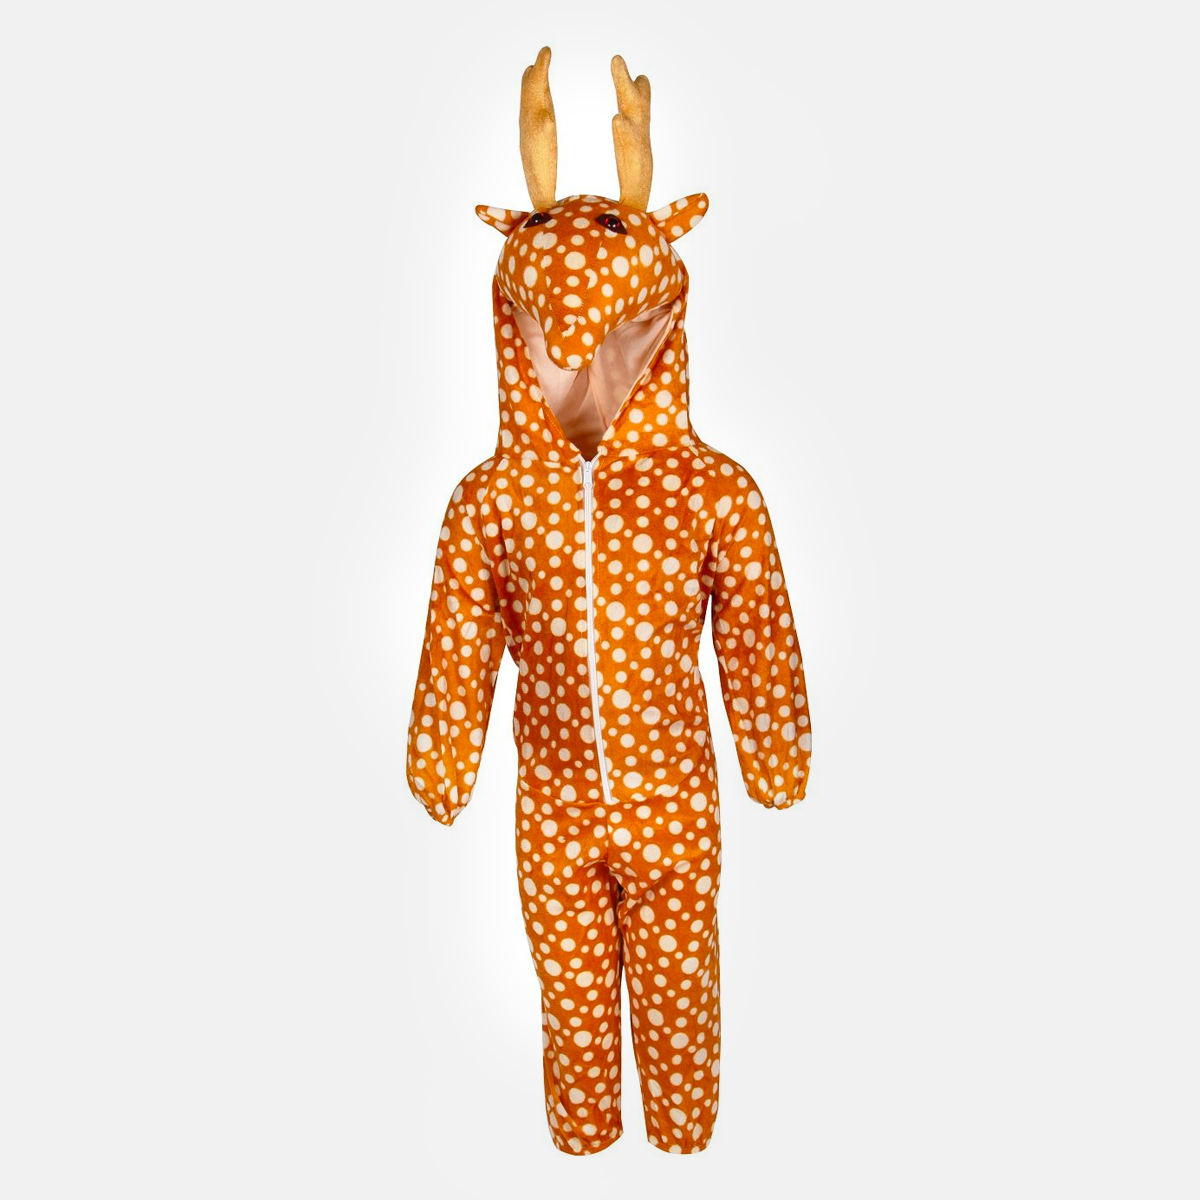 Animal Fancy Dress | Animal Costumes | Party Delights